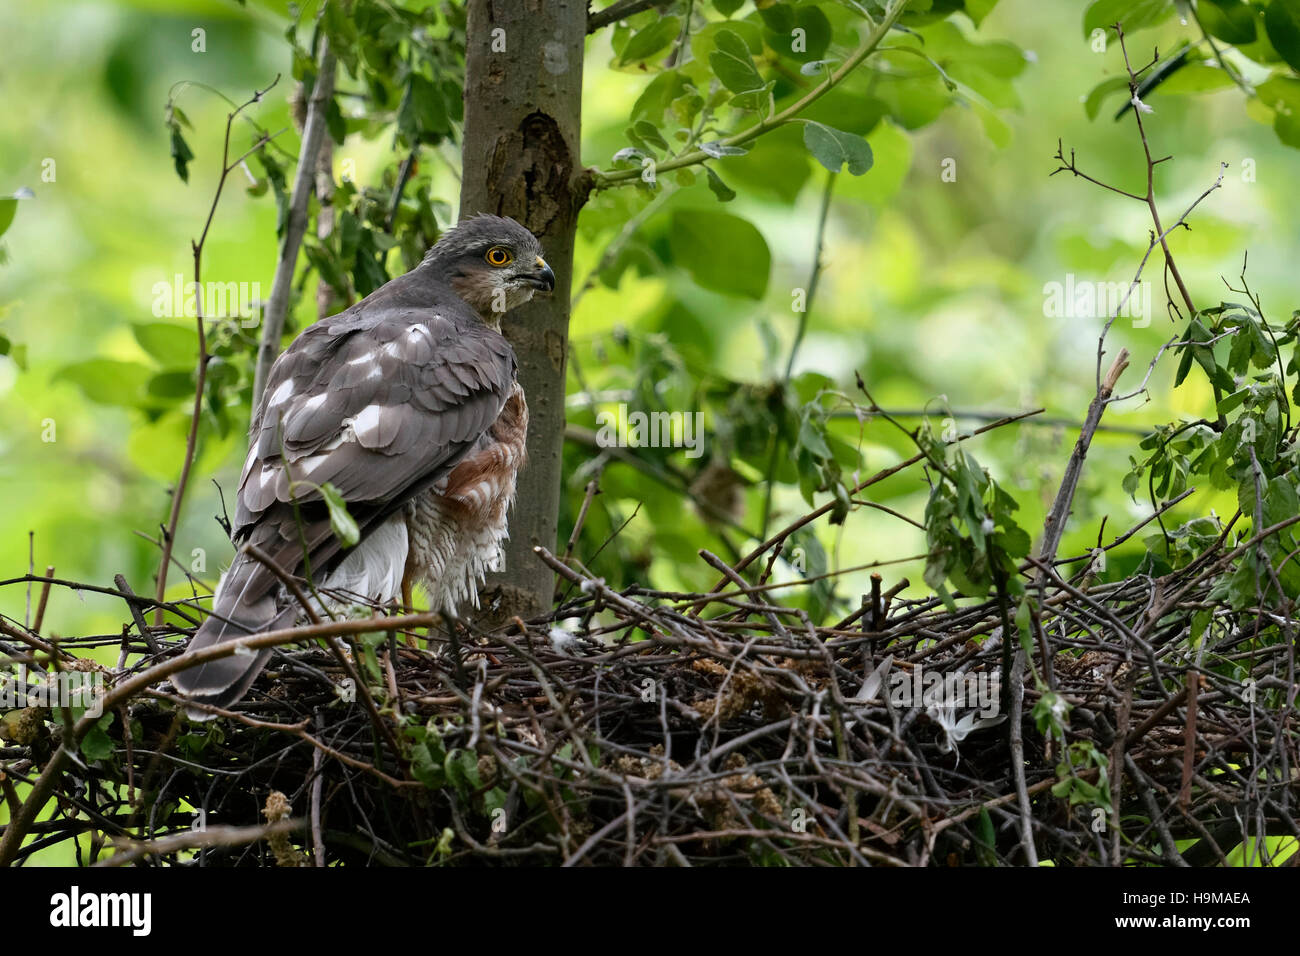 Sparrowhawk / Sperber ( Accipiter nisus ), adult female, perched on the edge of its eyrie, watching over its shoulder, backside view. Stock Photo